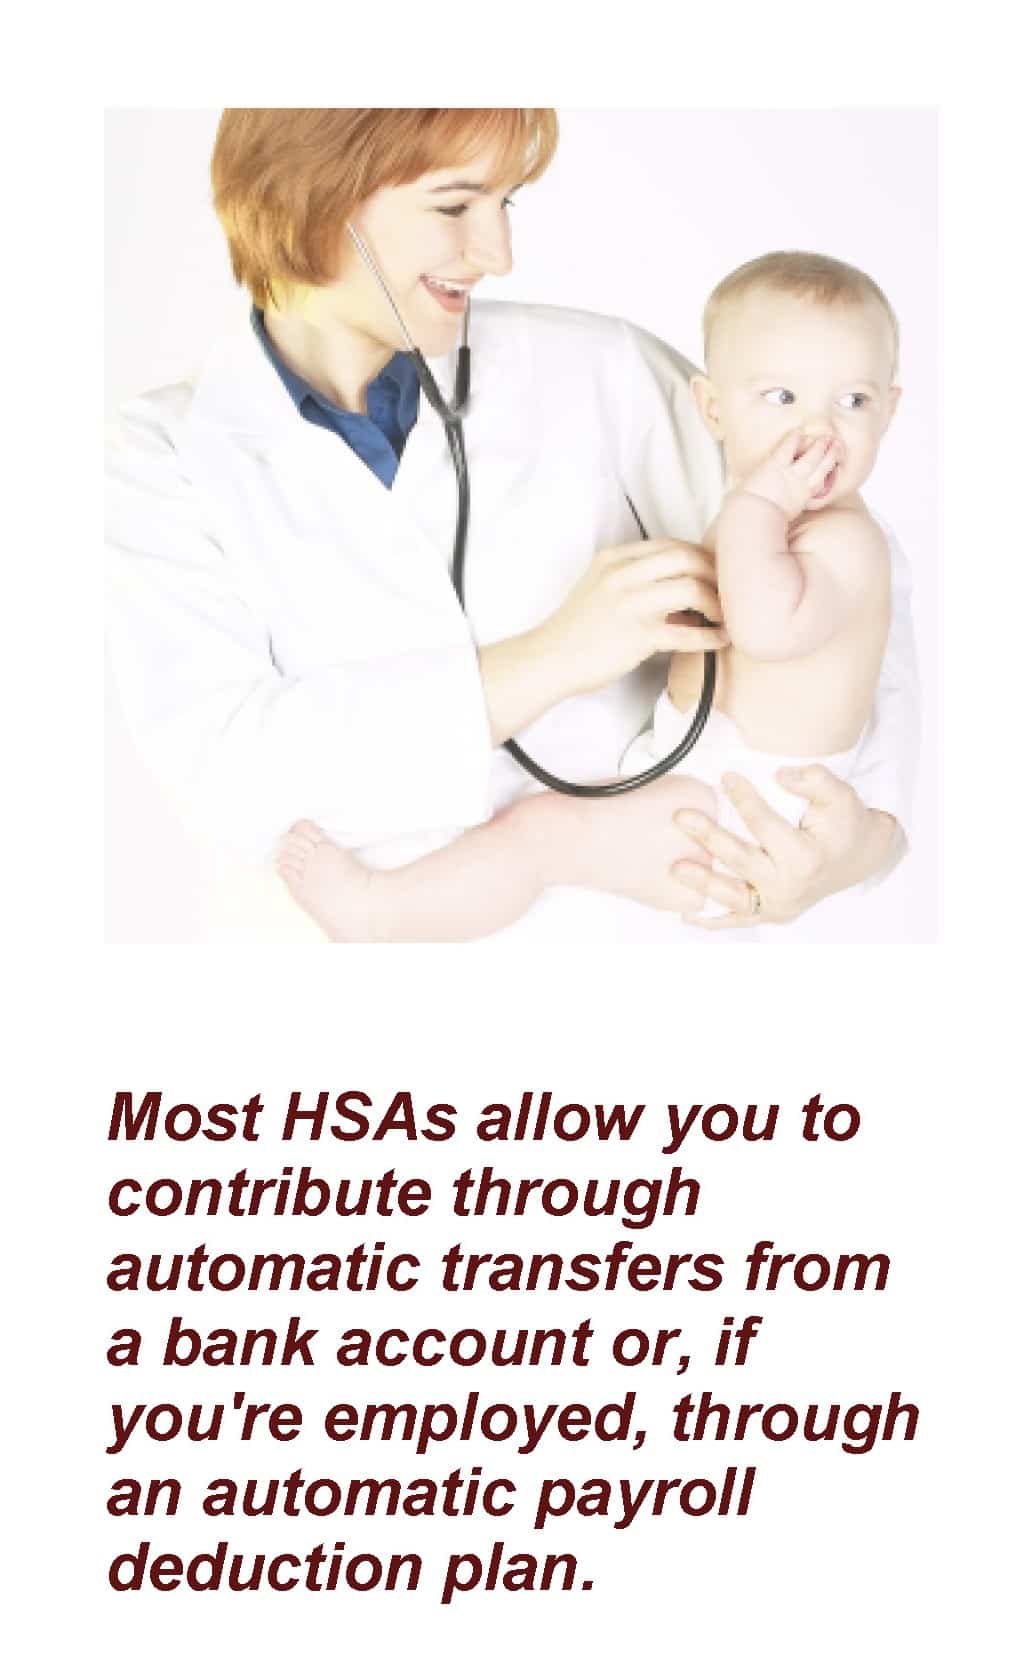 Doctor holding a baby. Text below the image: Most HSAs allow you to contribute through automatic transfers from a bank account or, if you're employed, through an automatic payroll deduction plan. Article title: Health Saving Accounts